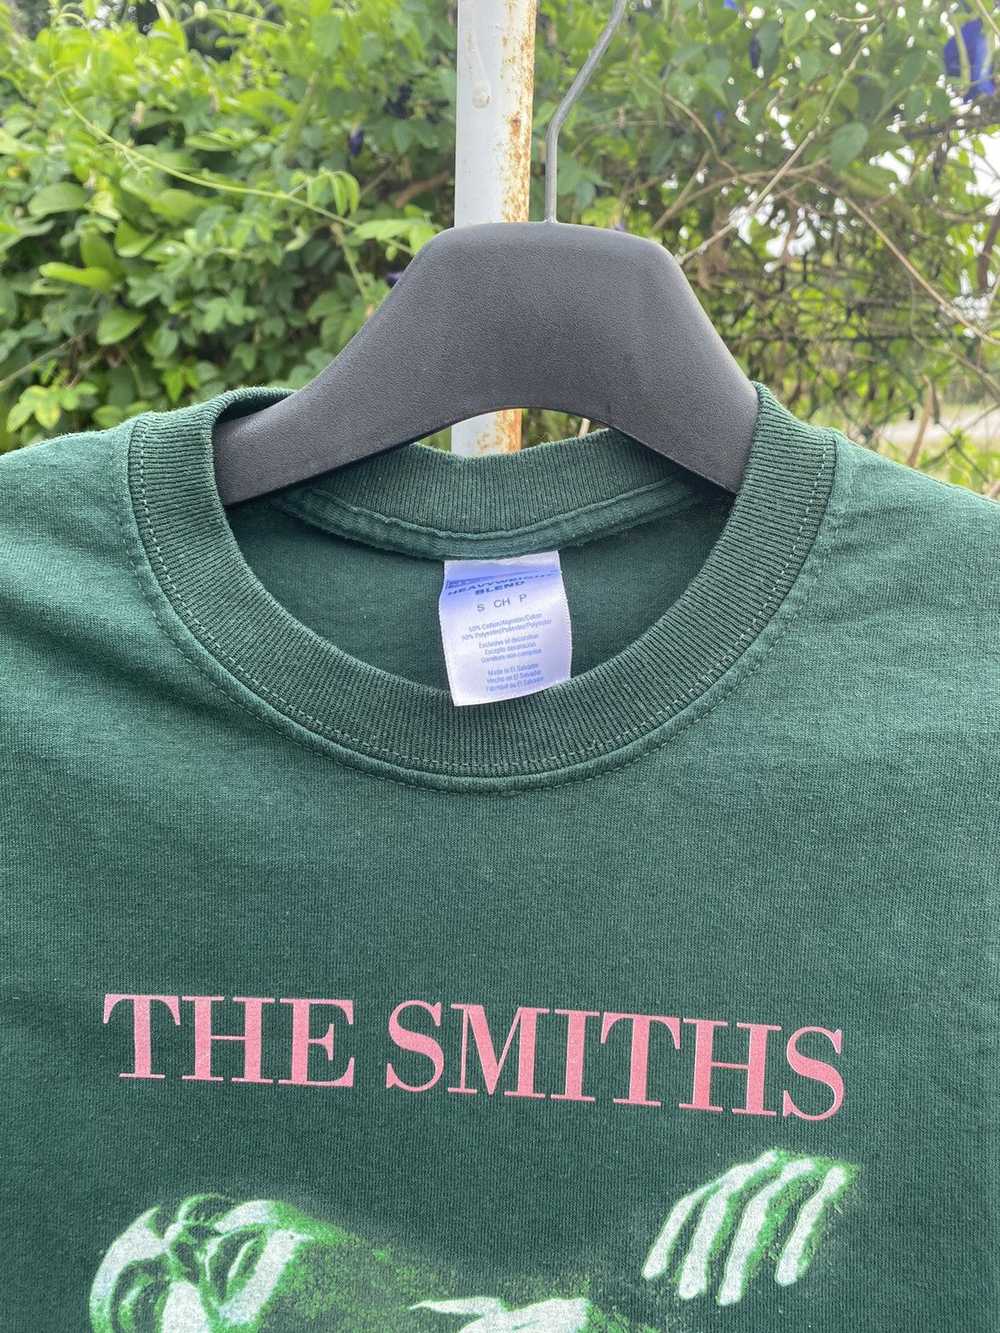 Band Tees × The Smiths × Vintage Vintage The Smit… - image 5